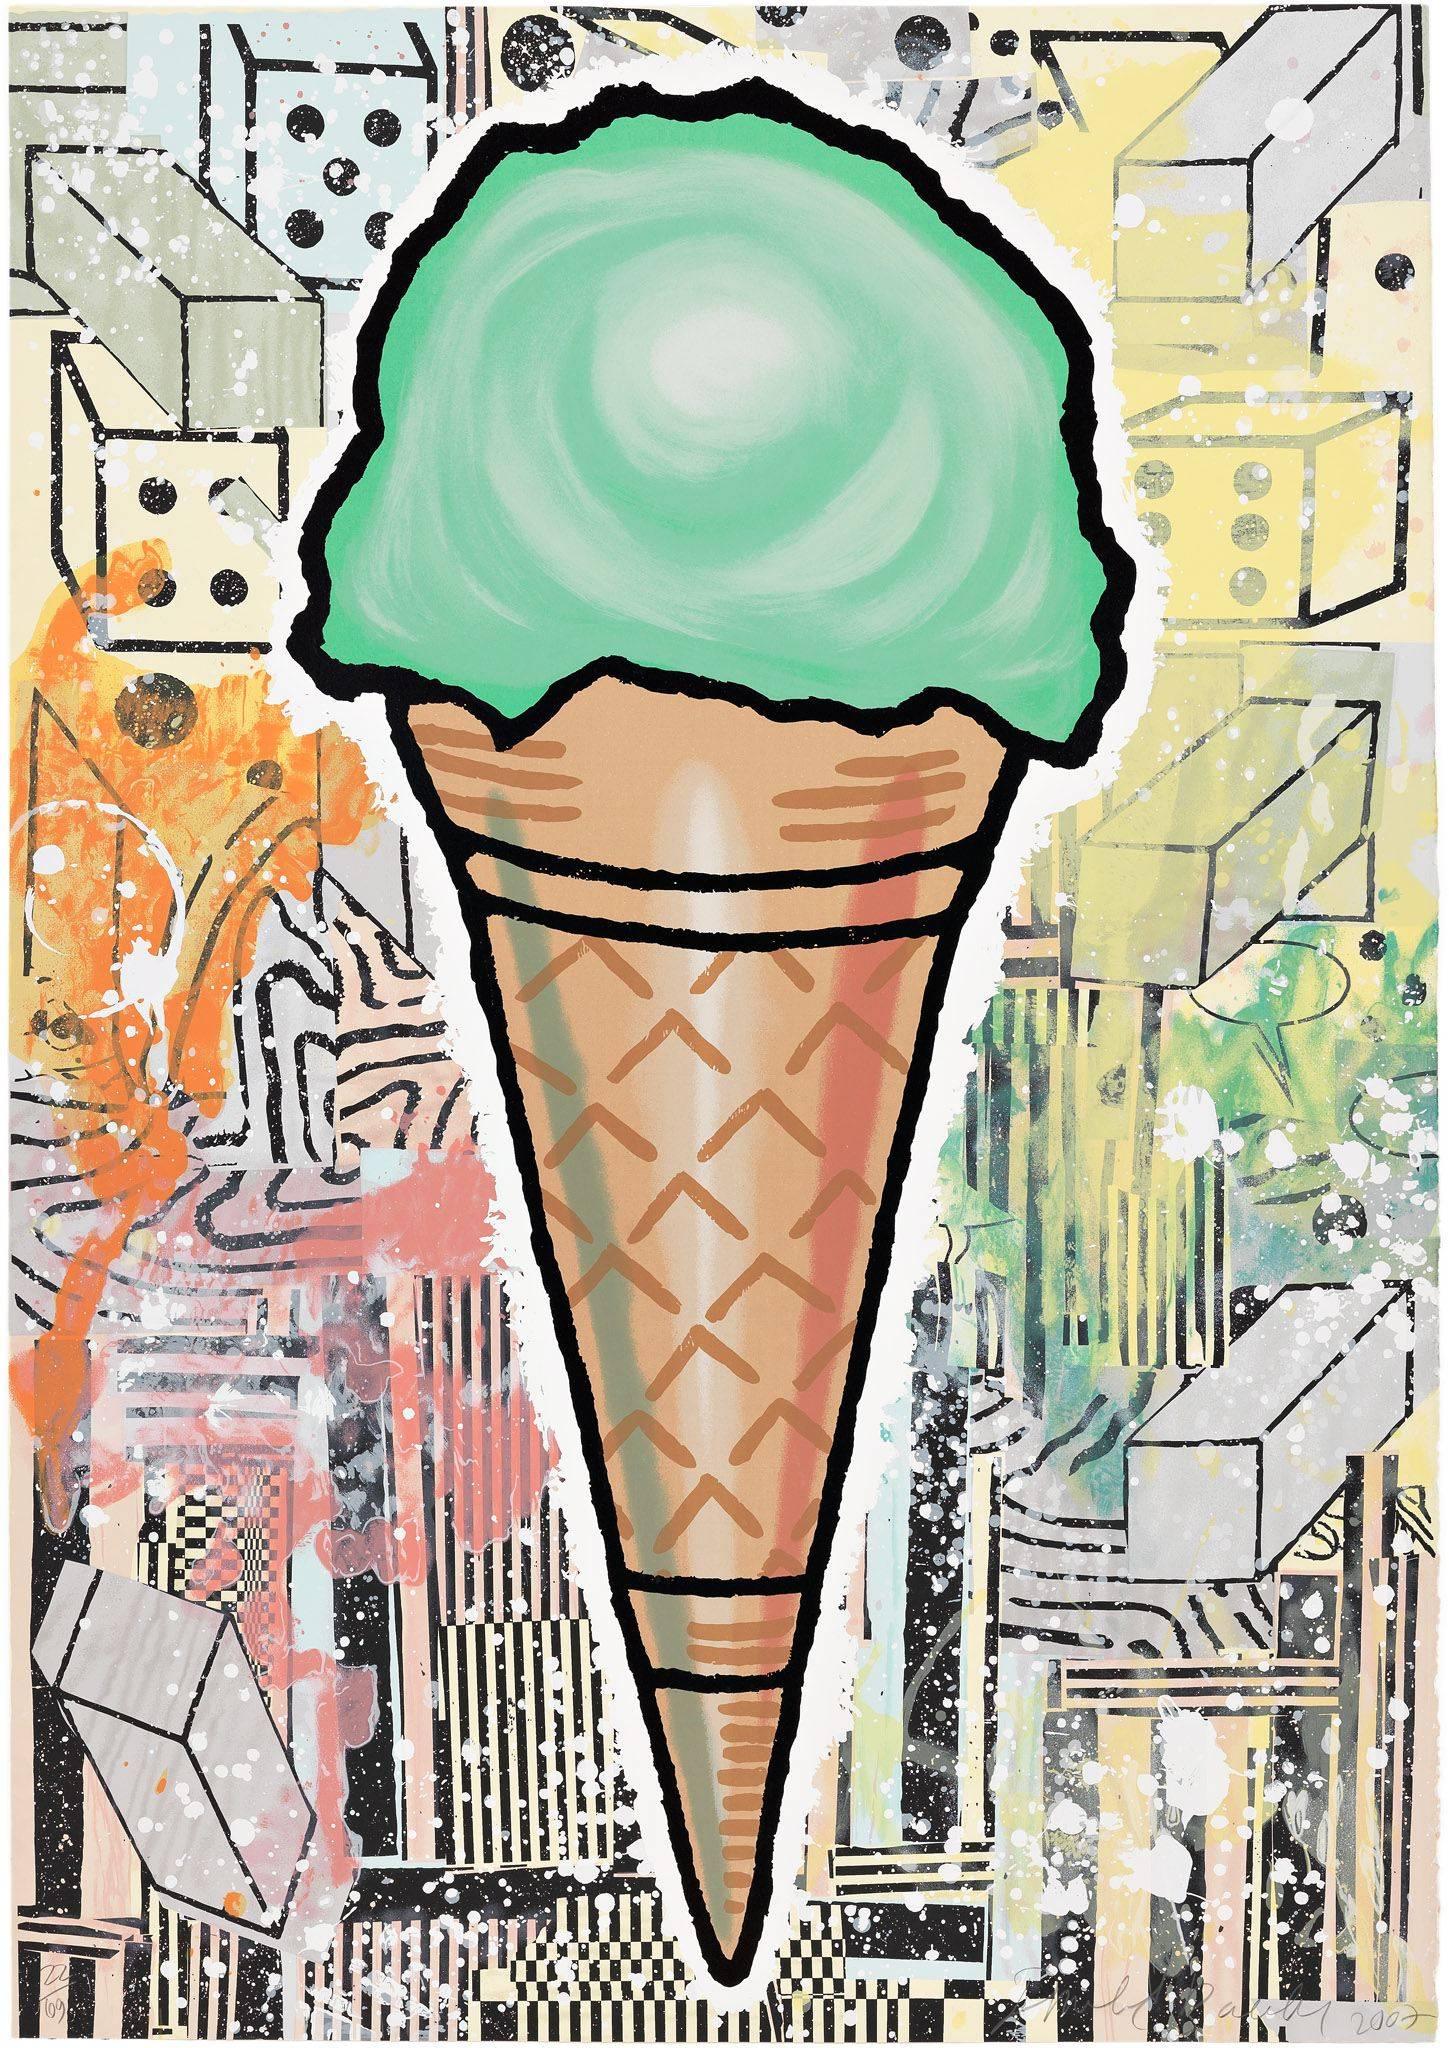 Green Cone - Print by Donald Baechler